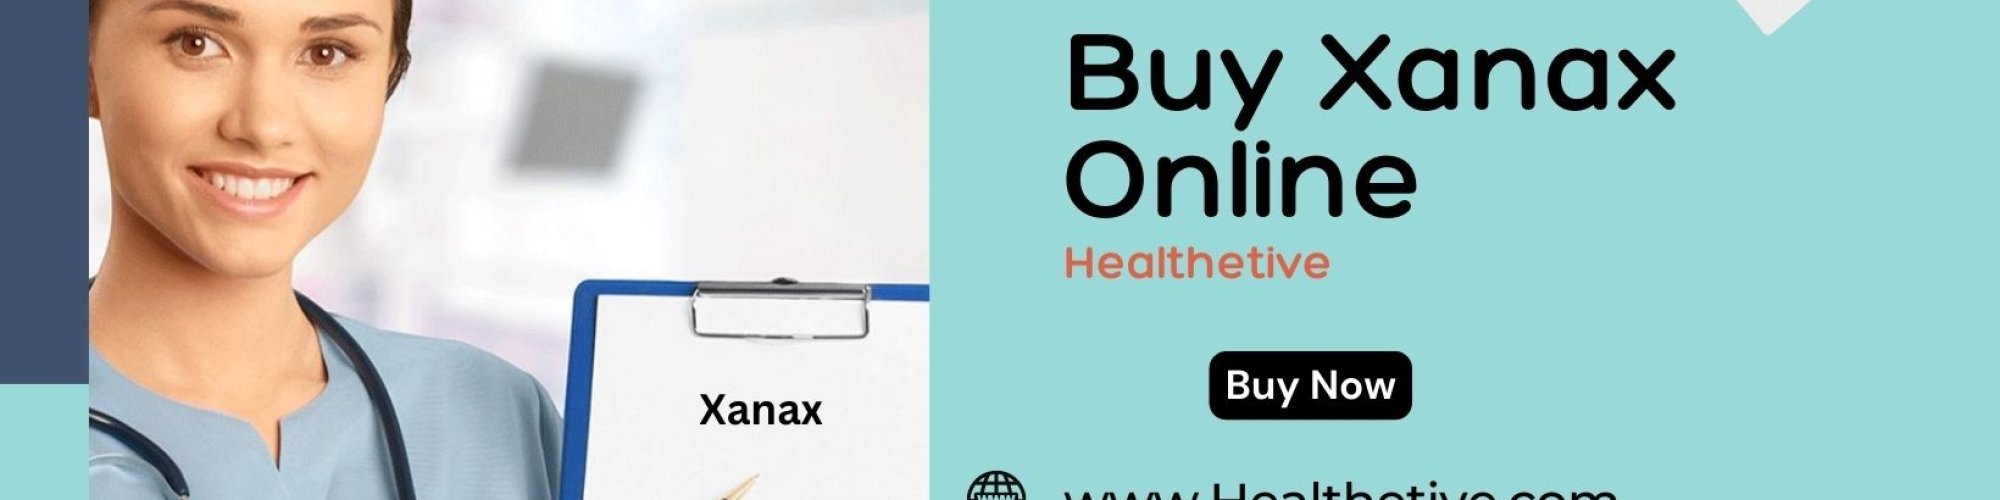 Buy Xanax Online without a prescription - Order Xanax Online - Buy Xanax doses Online